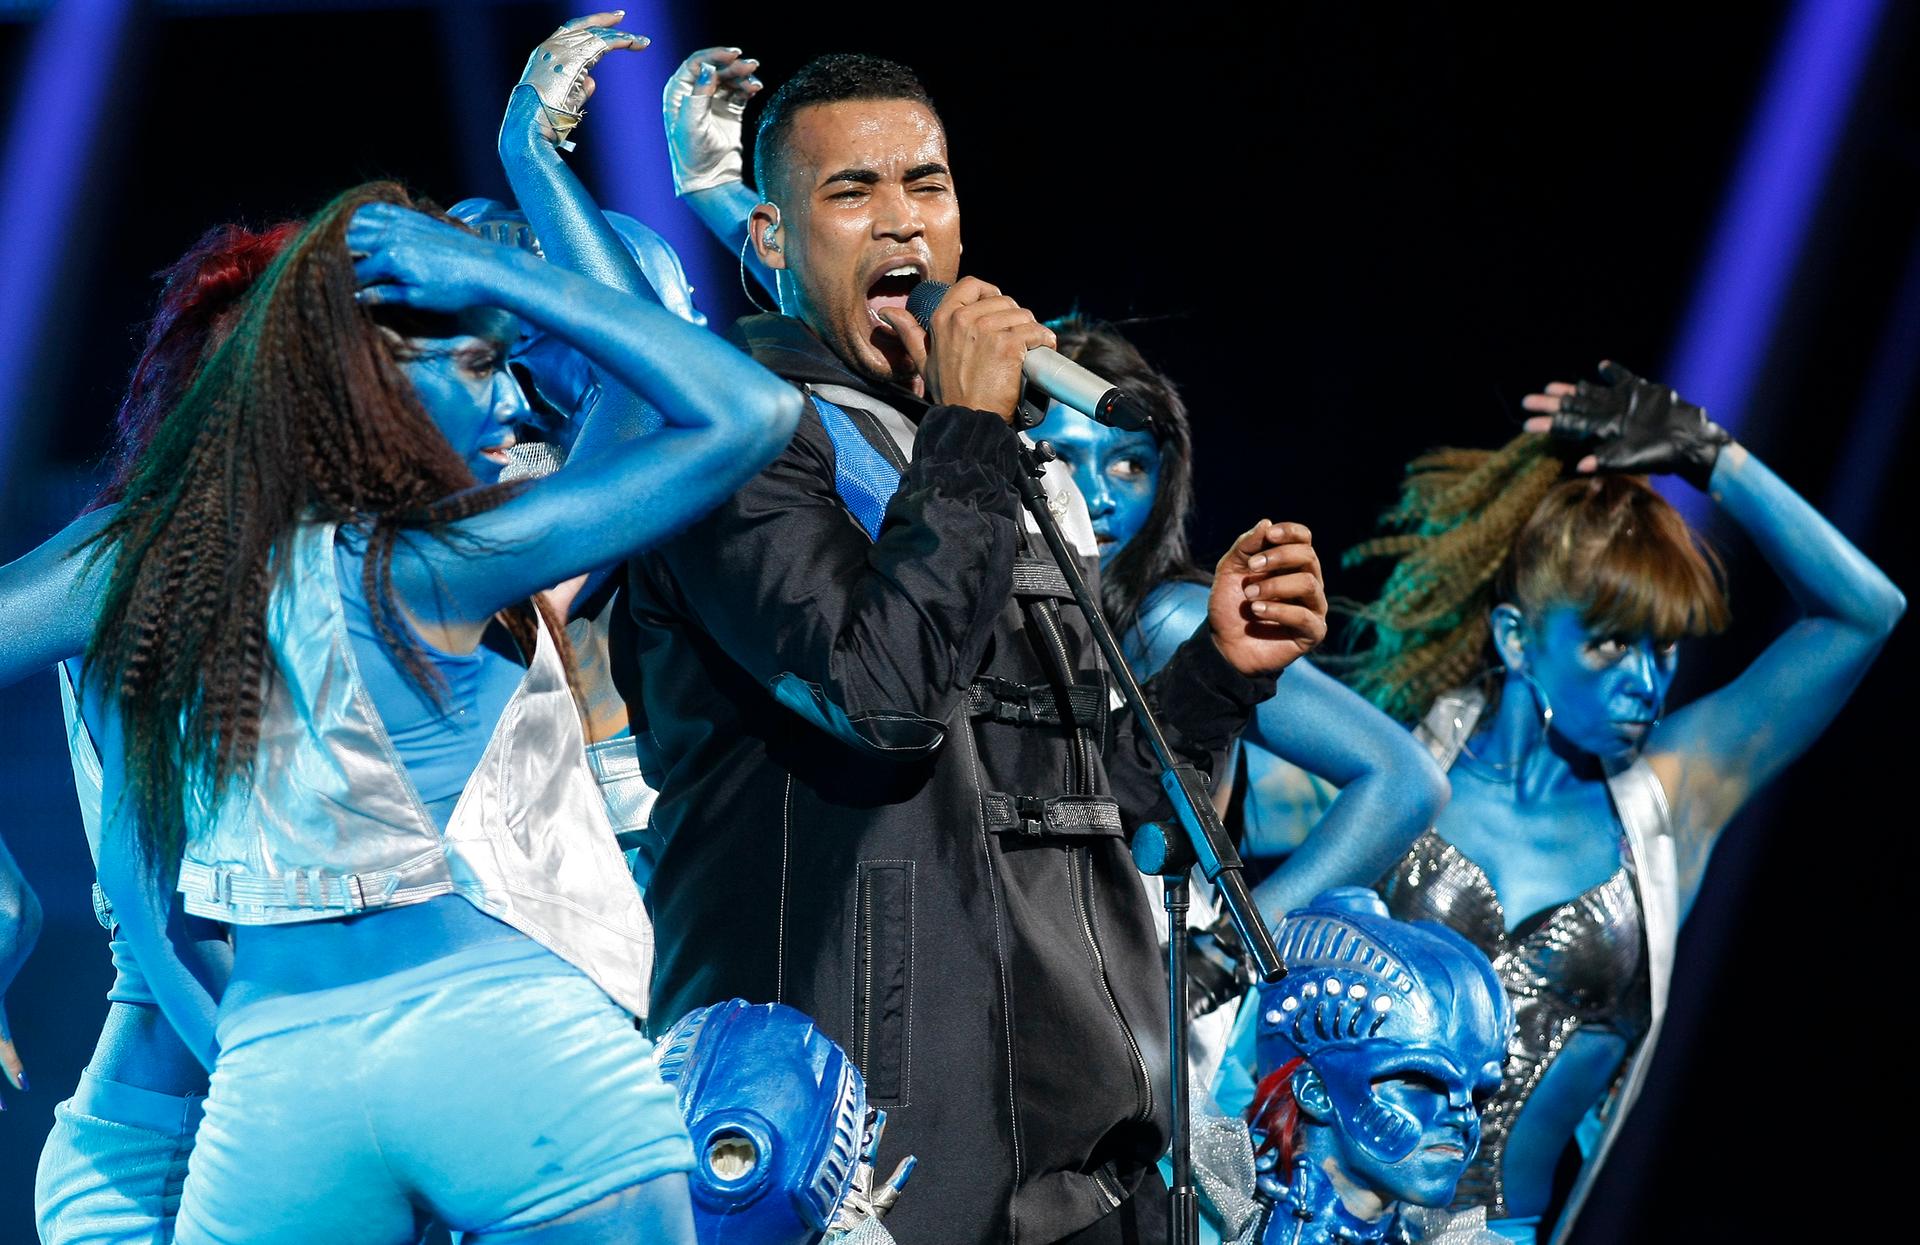 Puerto Rican Reggaeton singer Don Omar performs during the 51st International Song Festival in Vina del Mar city, about 75 miles (121 Km) northwest of Santiago, February 23, 2010.